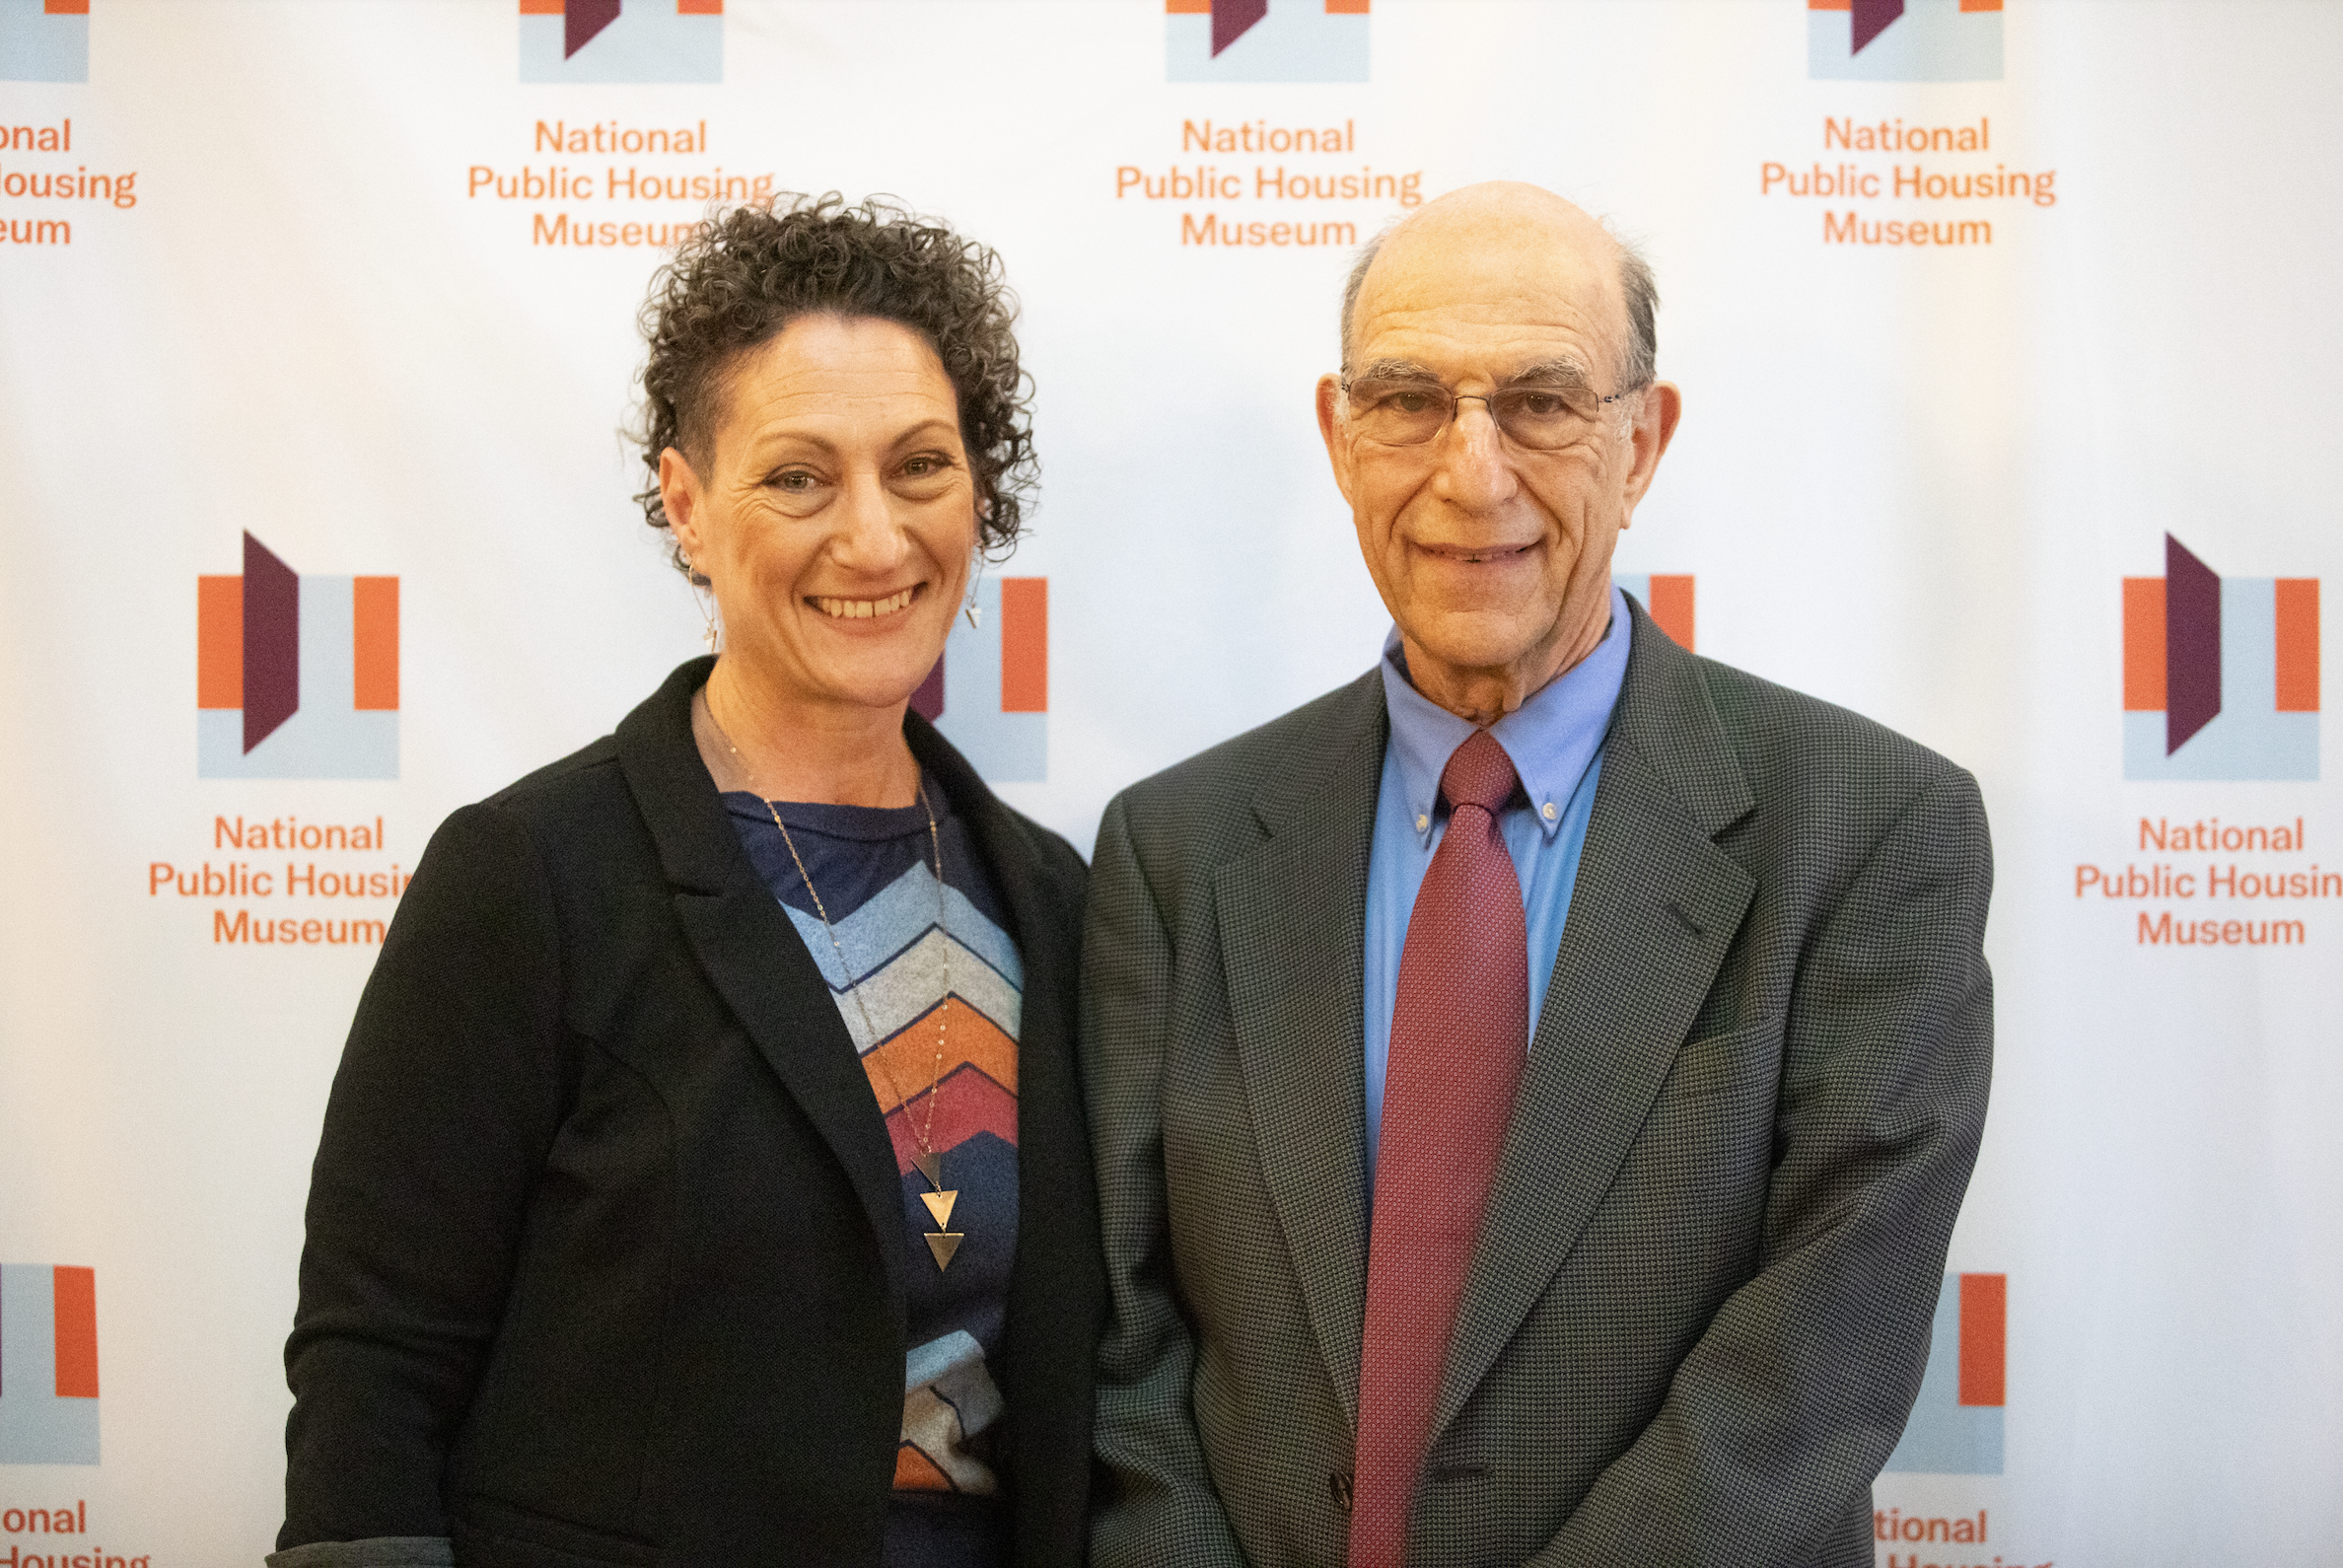  Authors Richard and Leah Rothstein stand in front of a branded white banner with small National Public Housing Museum logos repeated across it.  